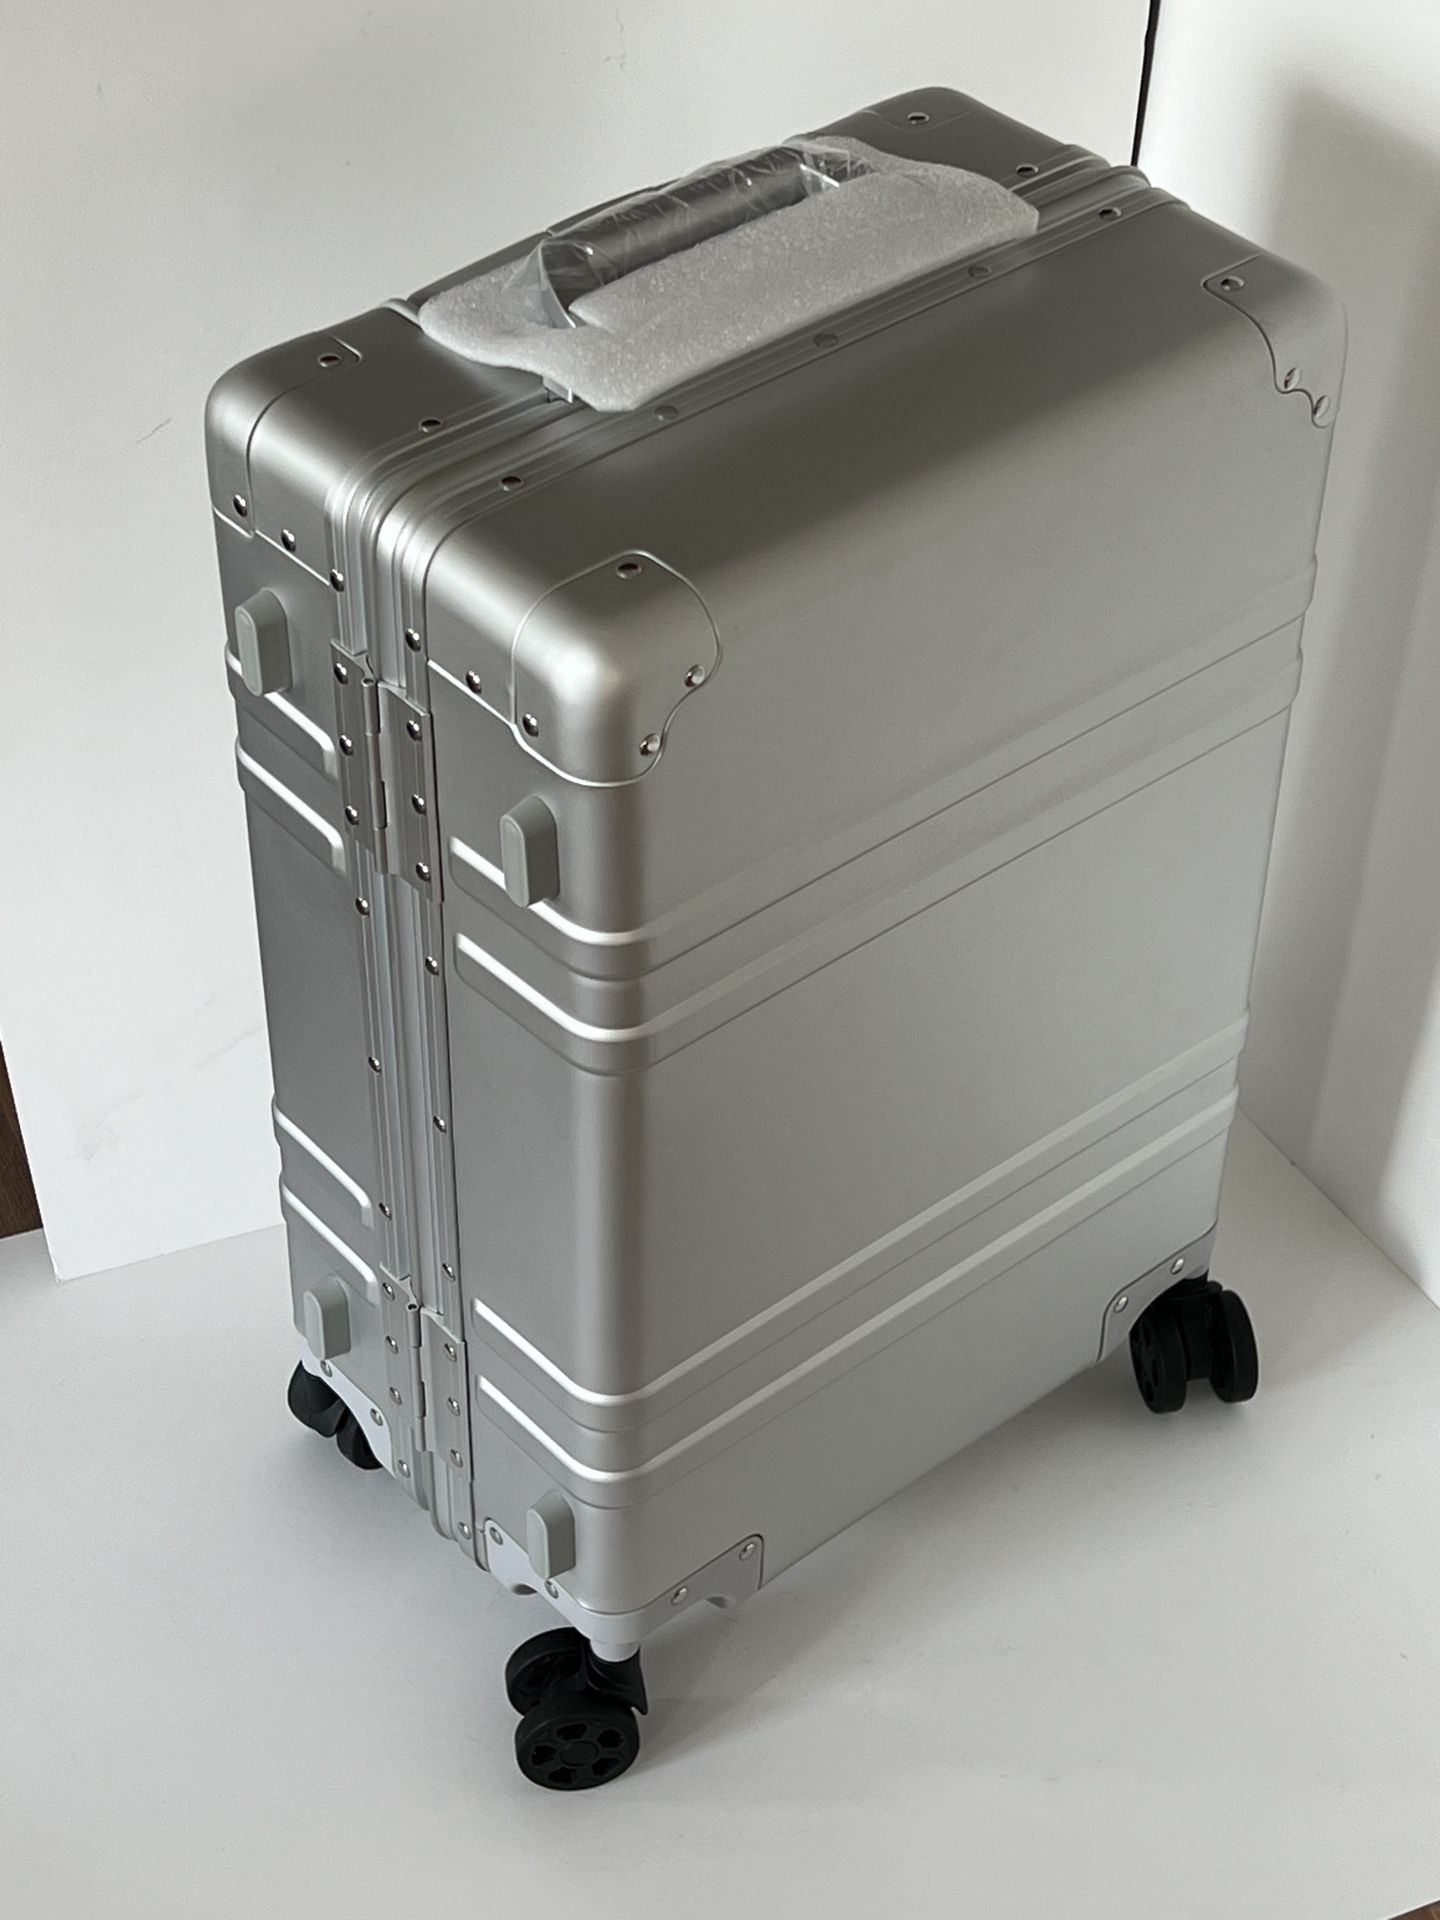 Luggage Aluminum Carry-on Silver or Black